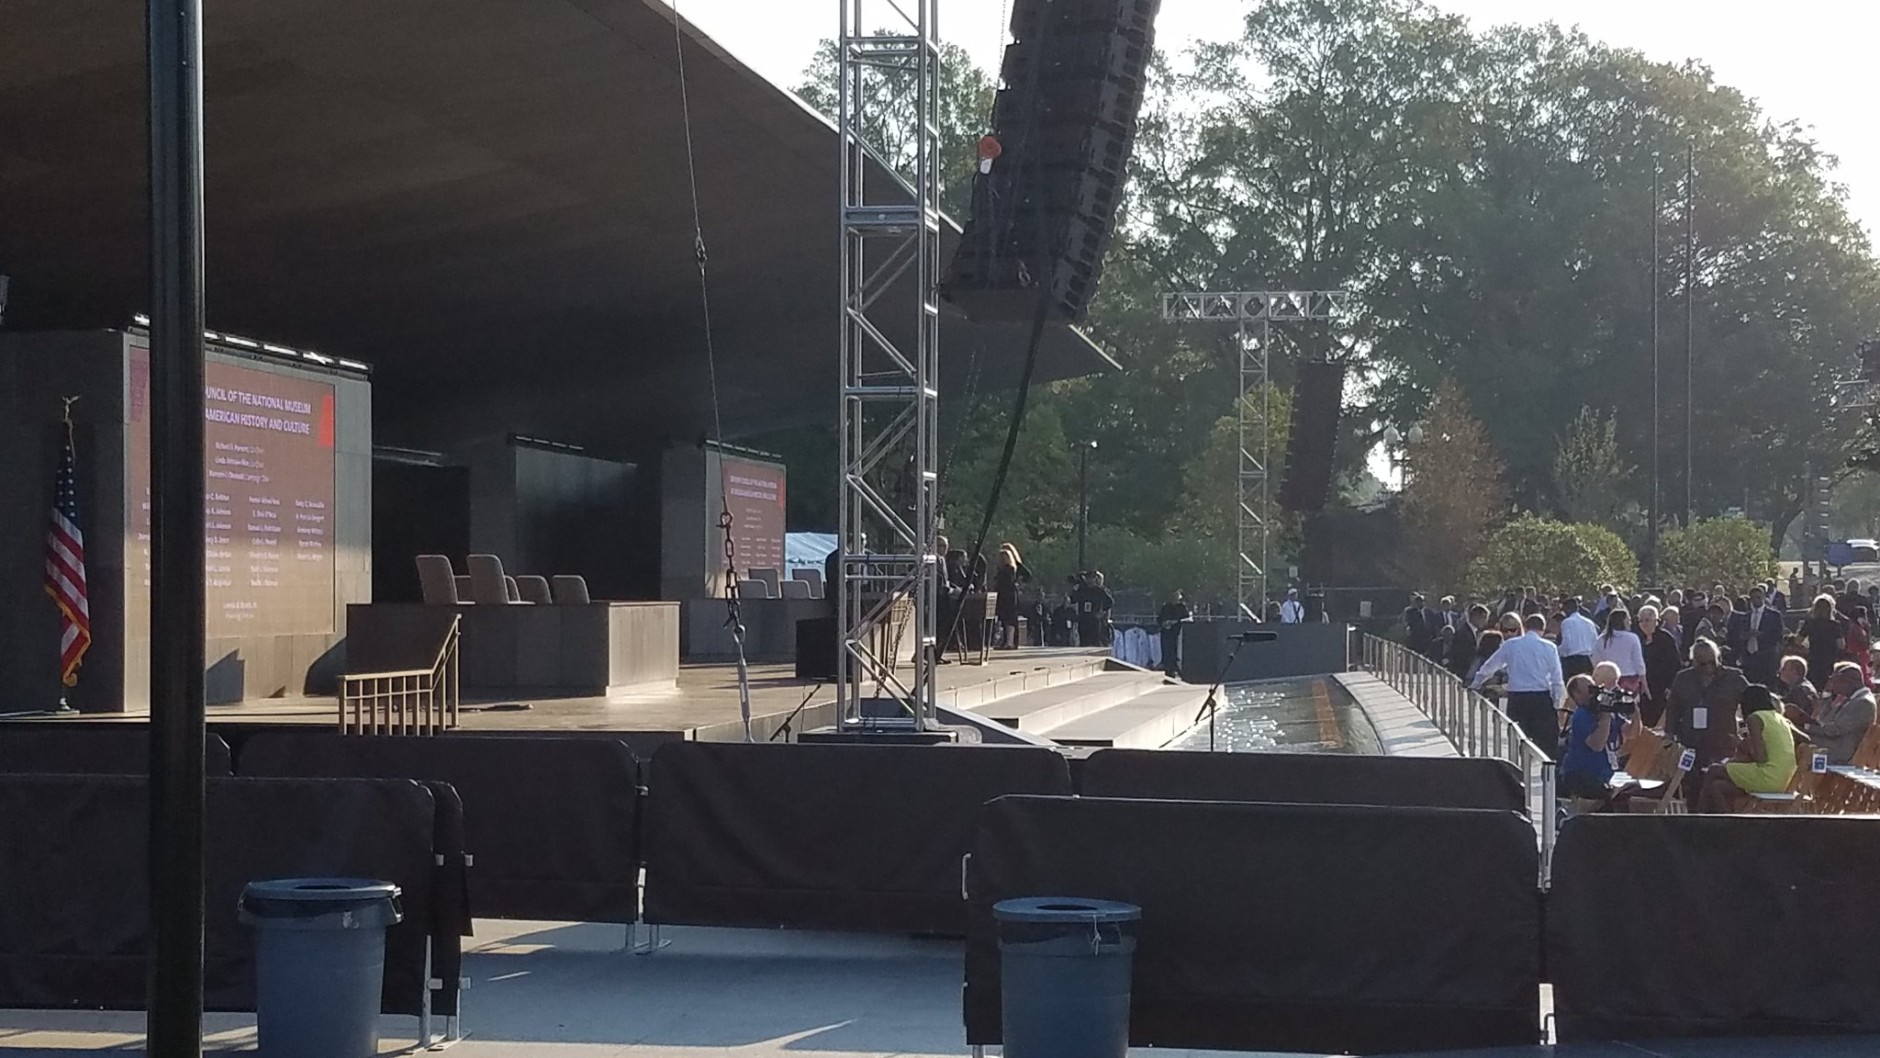 The stage is set for the Smithsonian National Museum of African American History and Culture's opening weekend ceremony. 